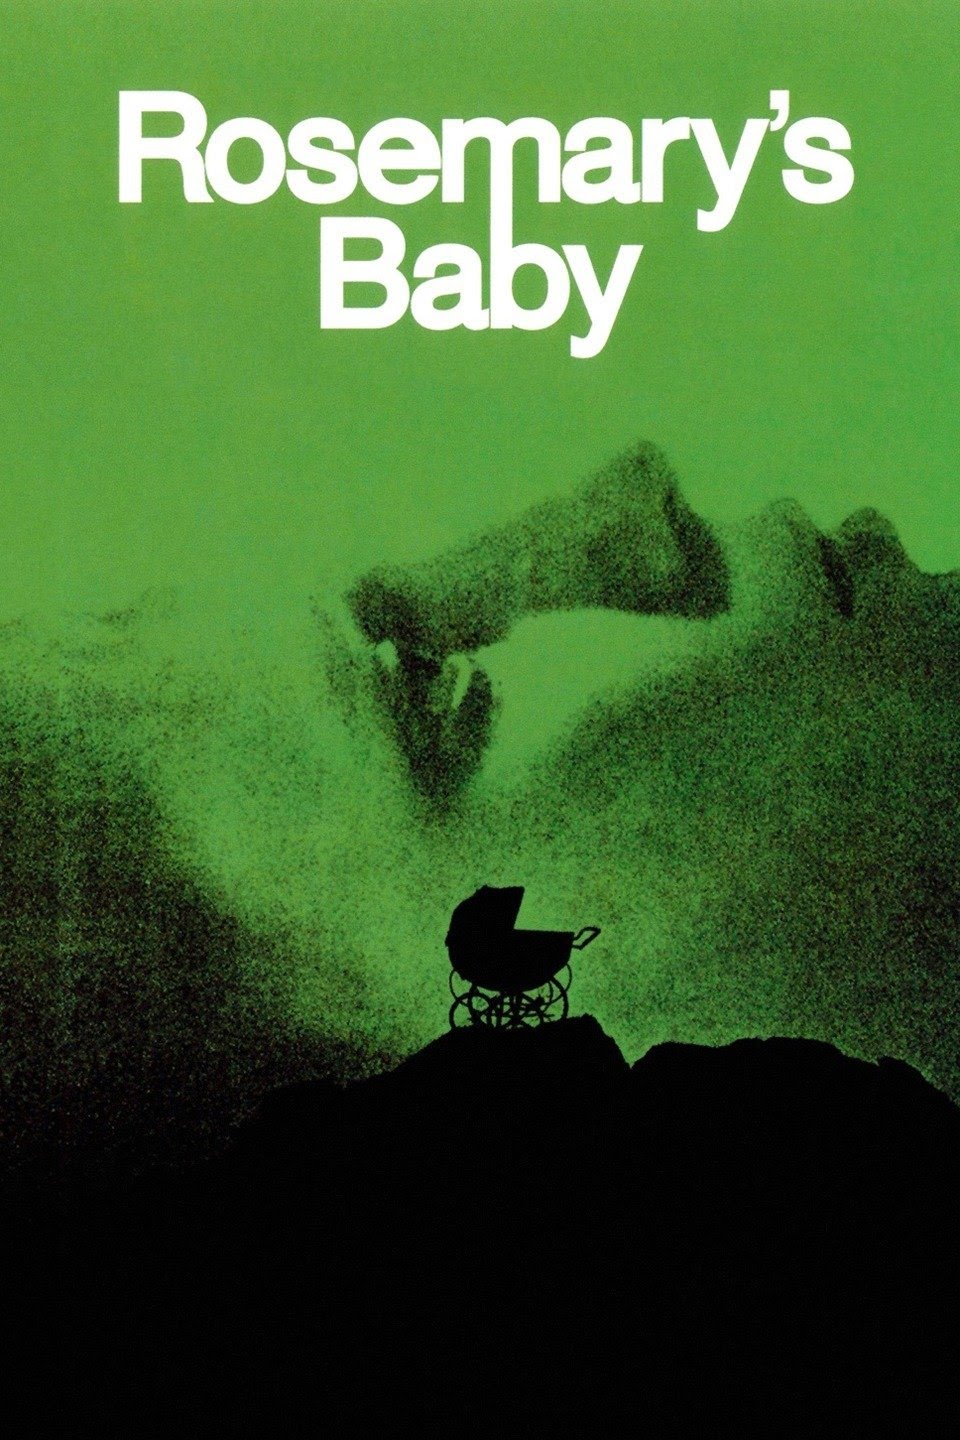 Cover Film poster of Rosemary's Baby. "Rosemary's Baby" written at the top and Mia Farrow's profile with baby carriage underneath.